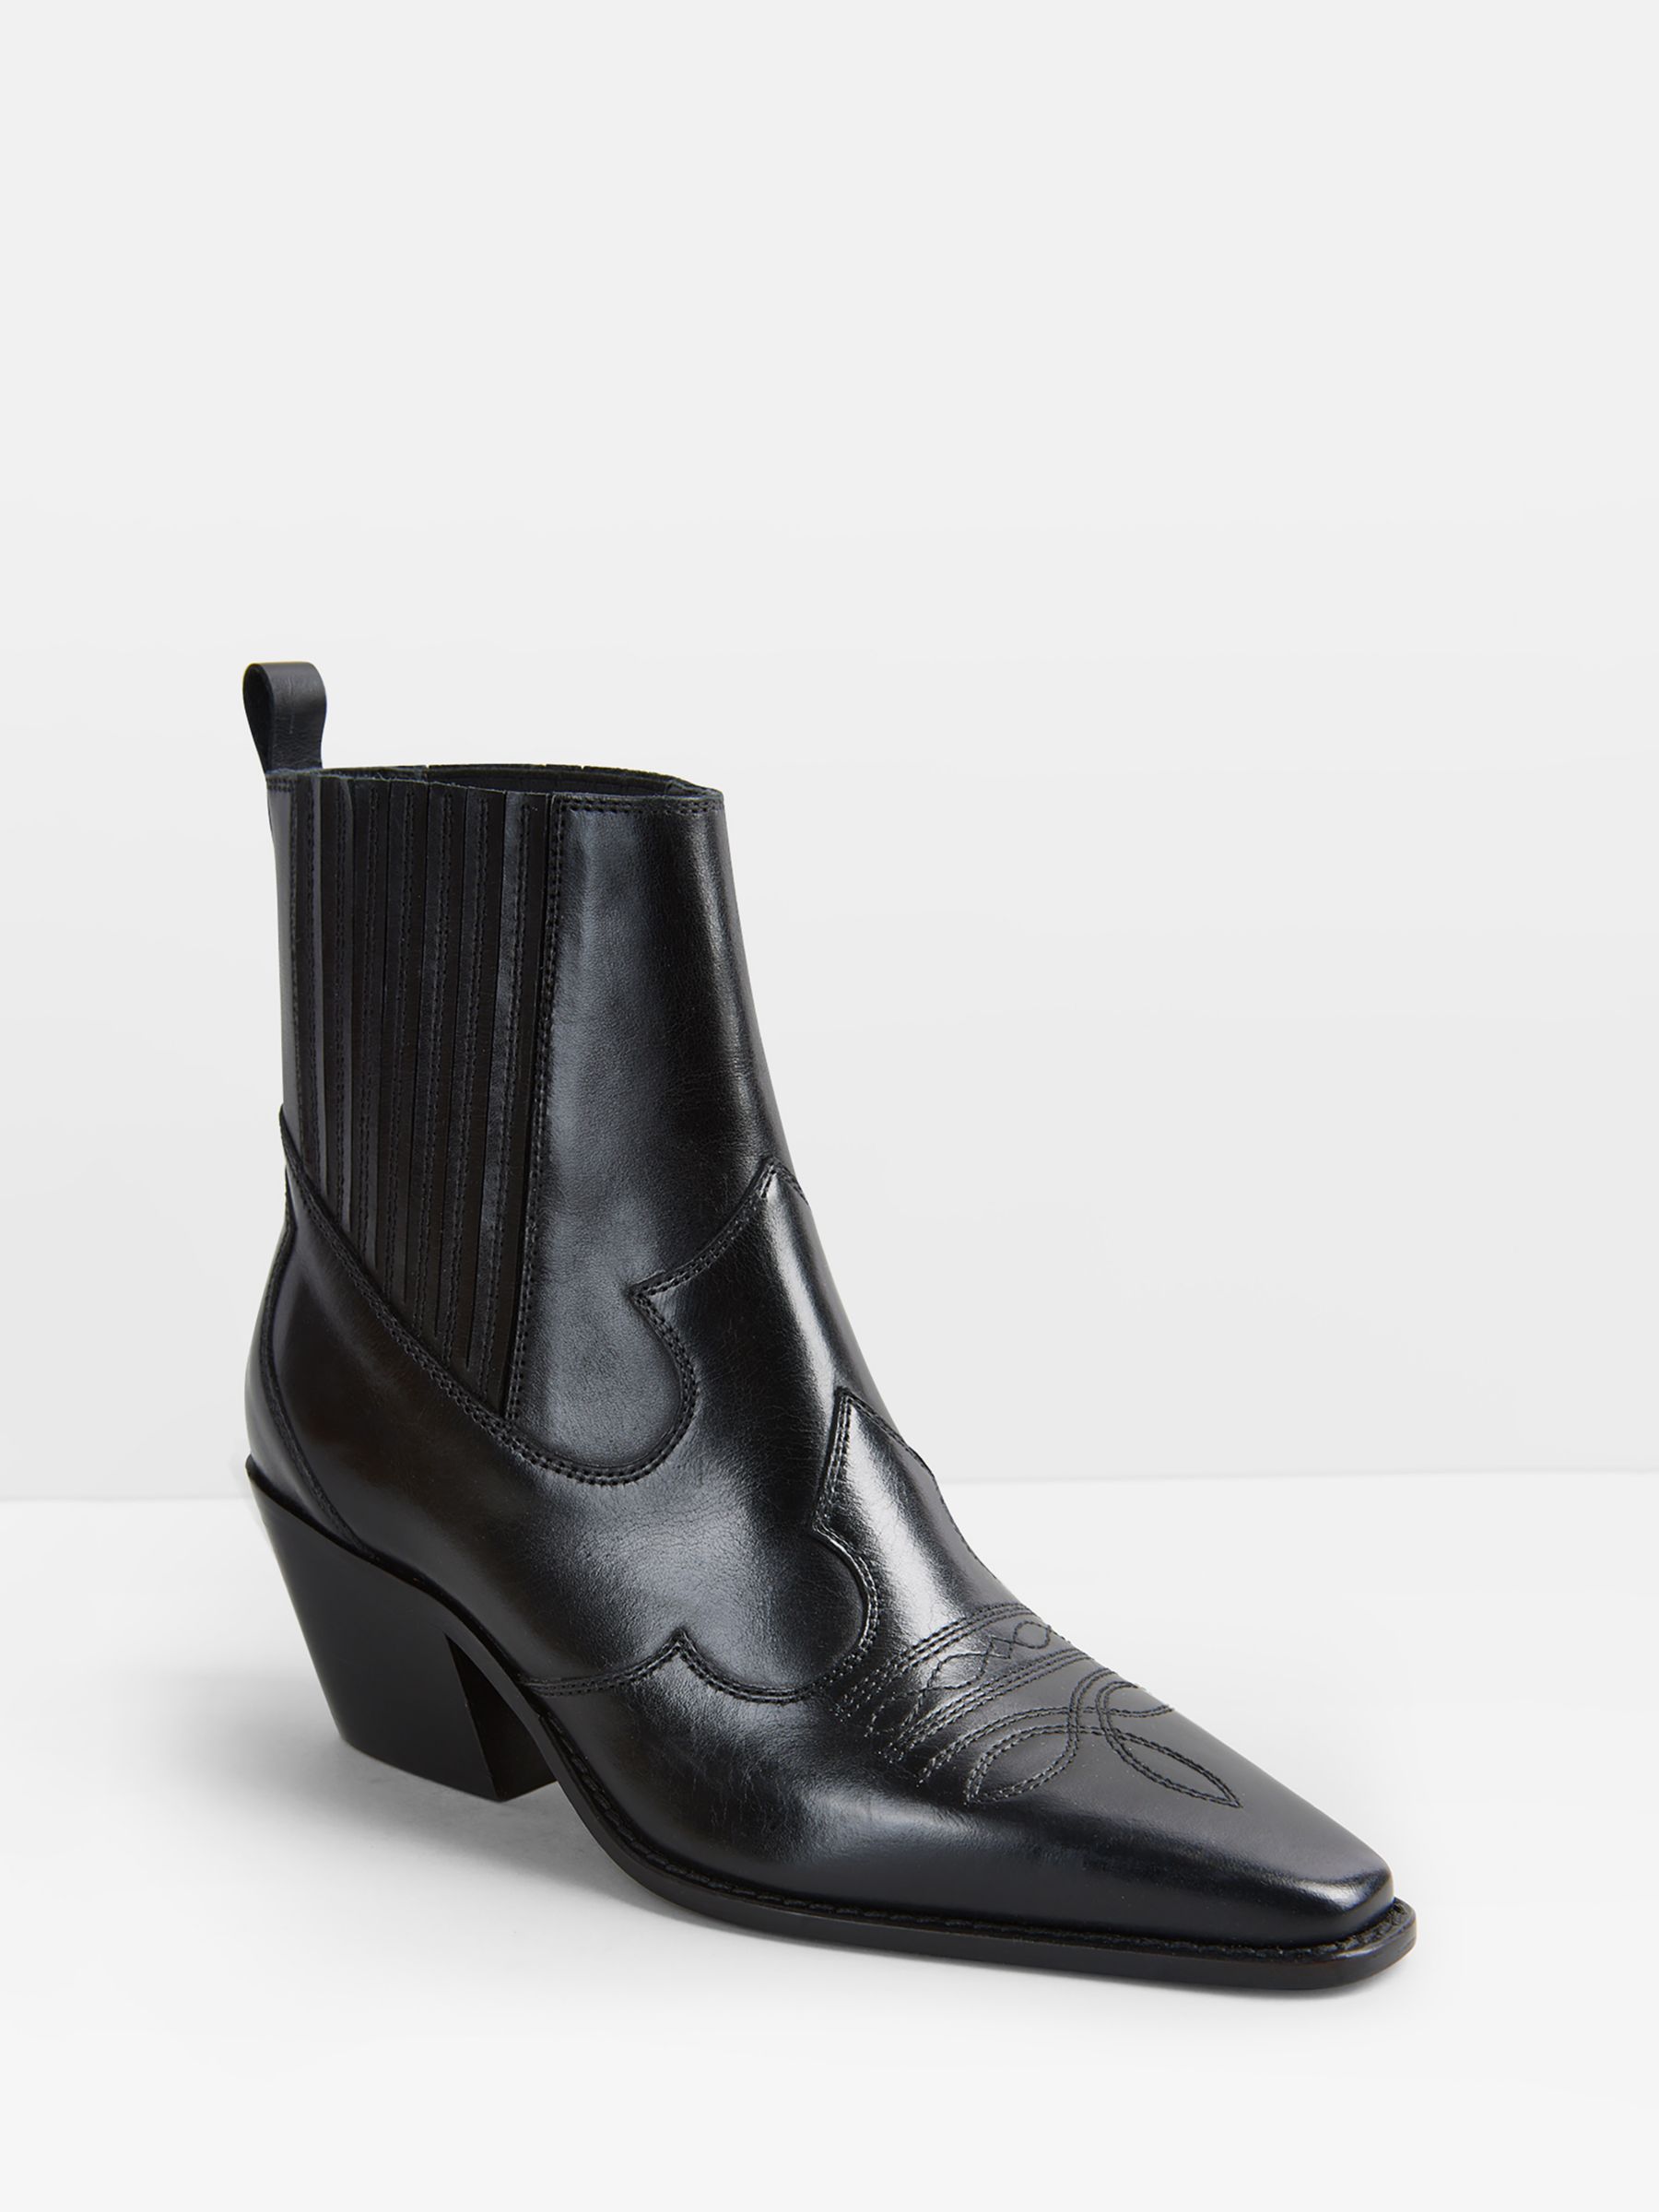 HUSH Kendall Western Leather Boots, Black at John Lewis & Partners